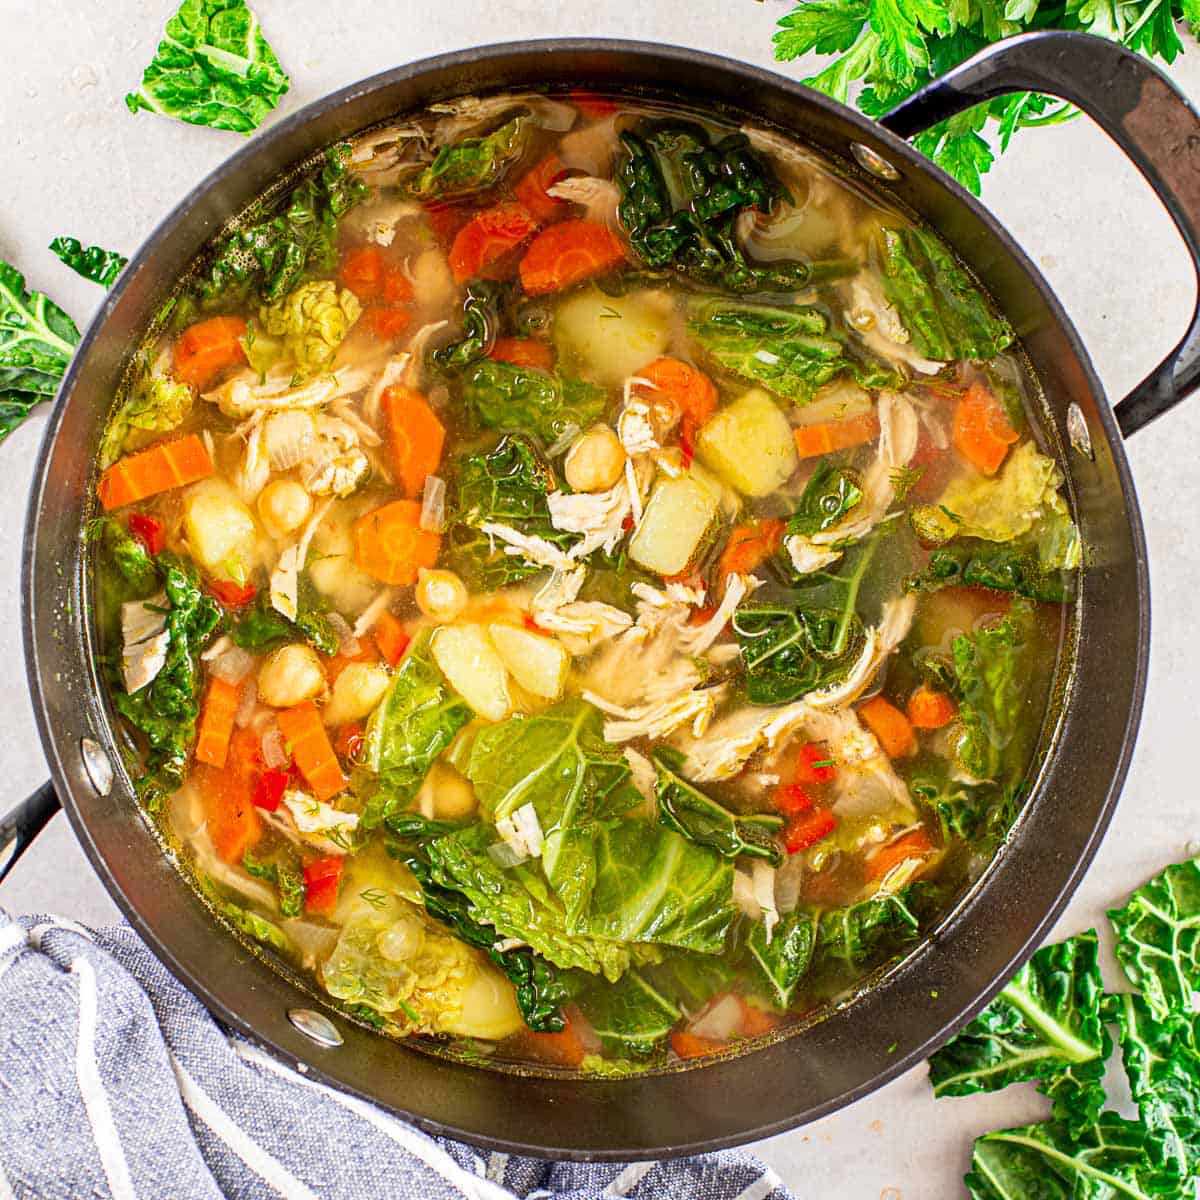 Gluten Free Chicken Soup With Kale - The Yummy Bowl